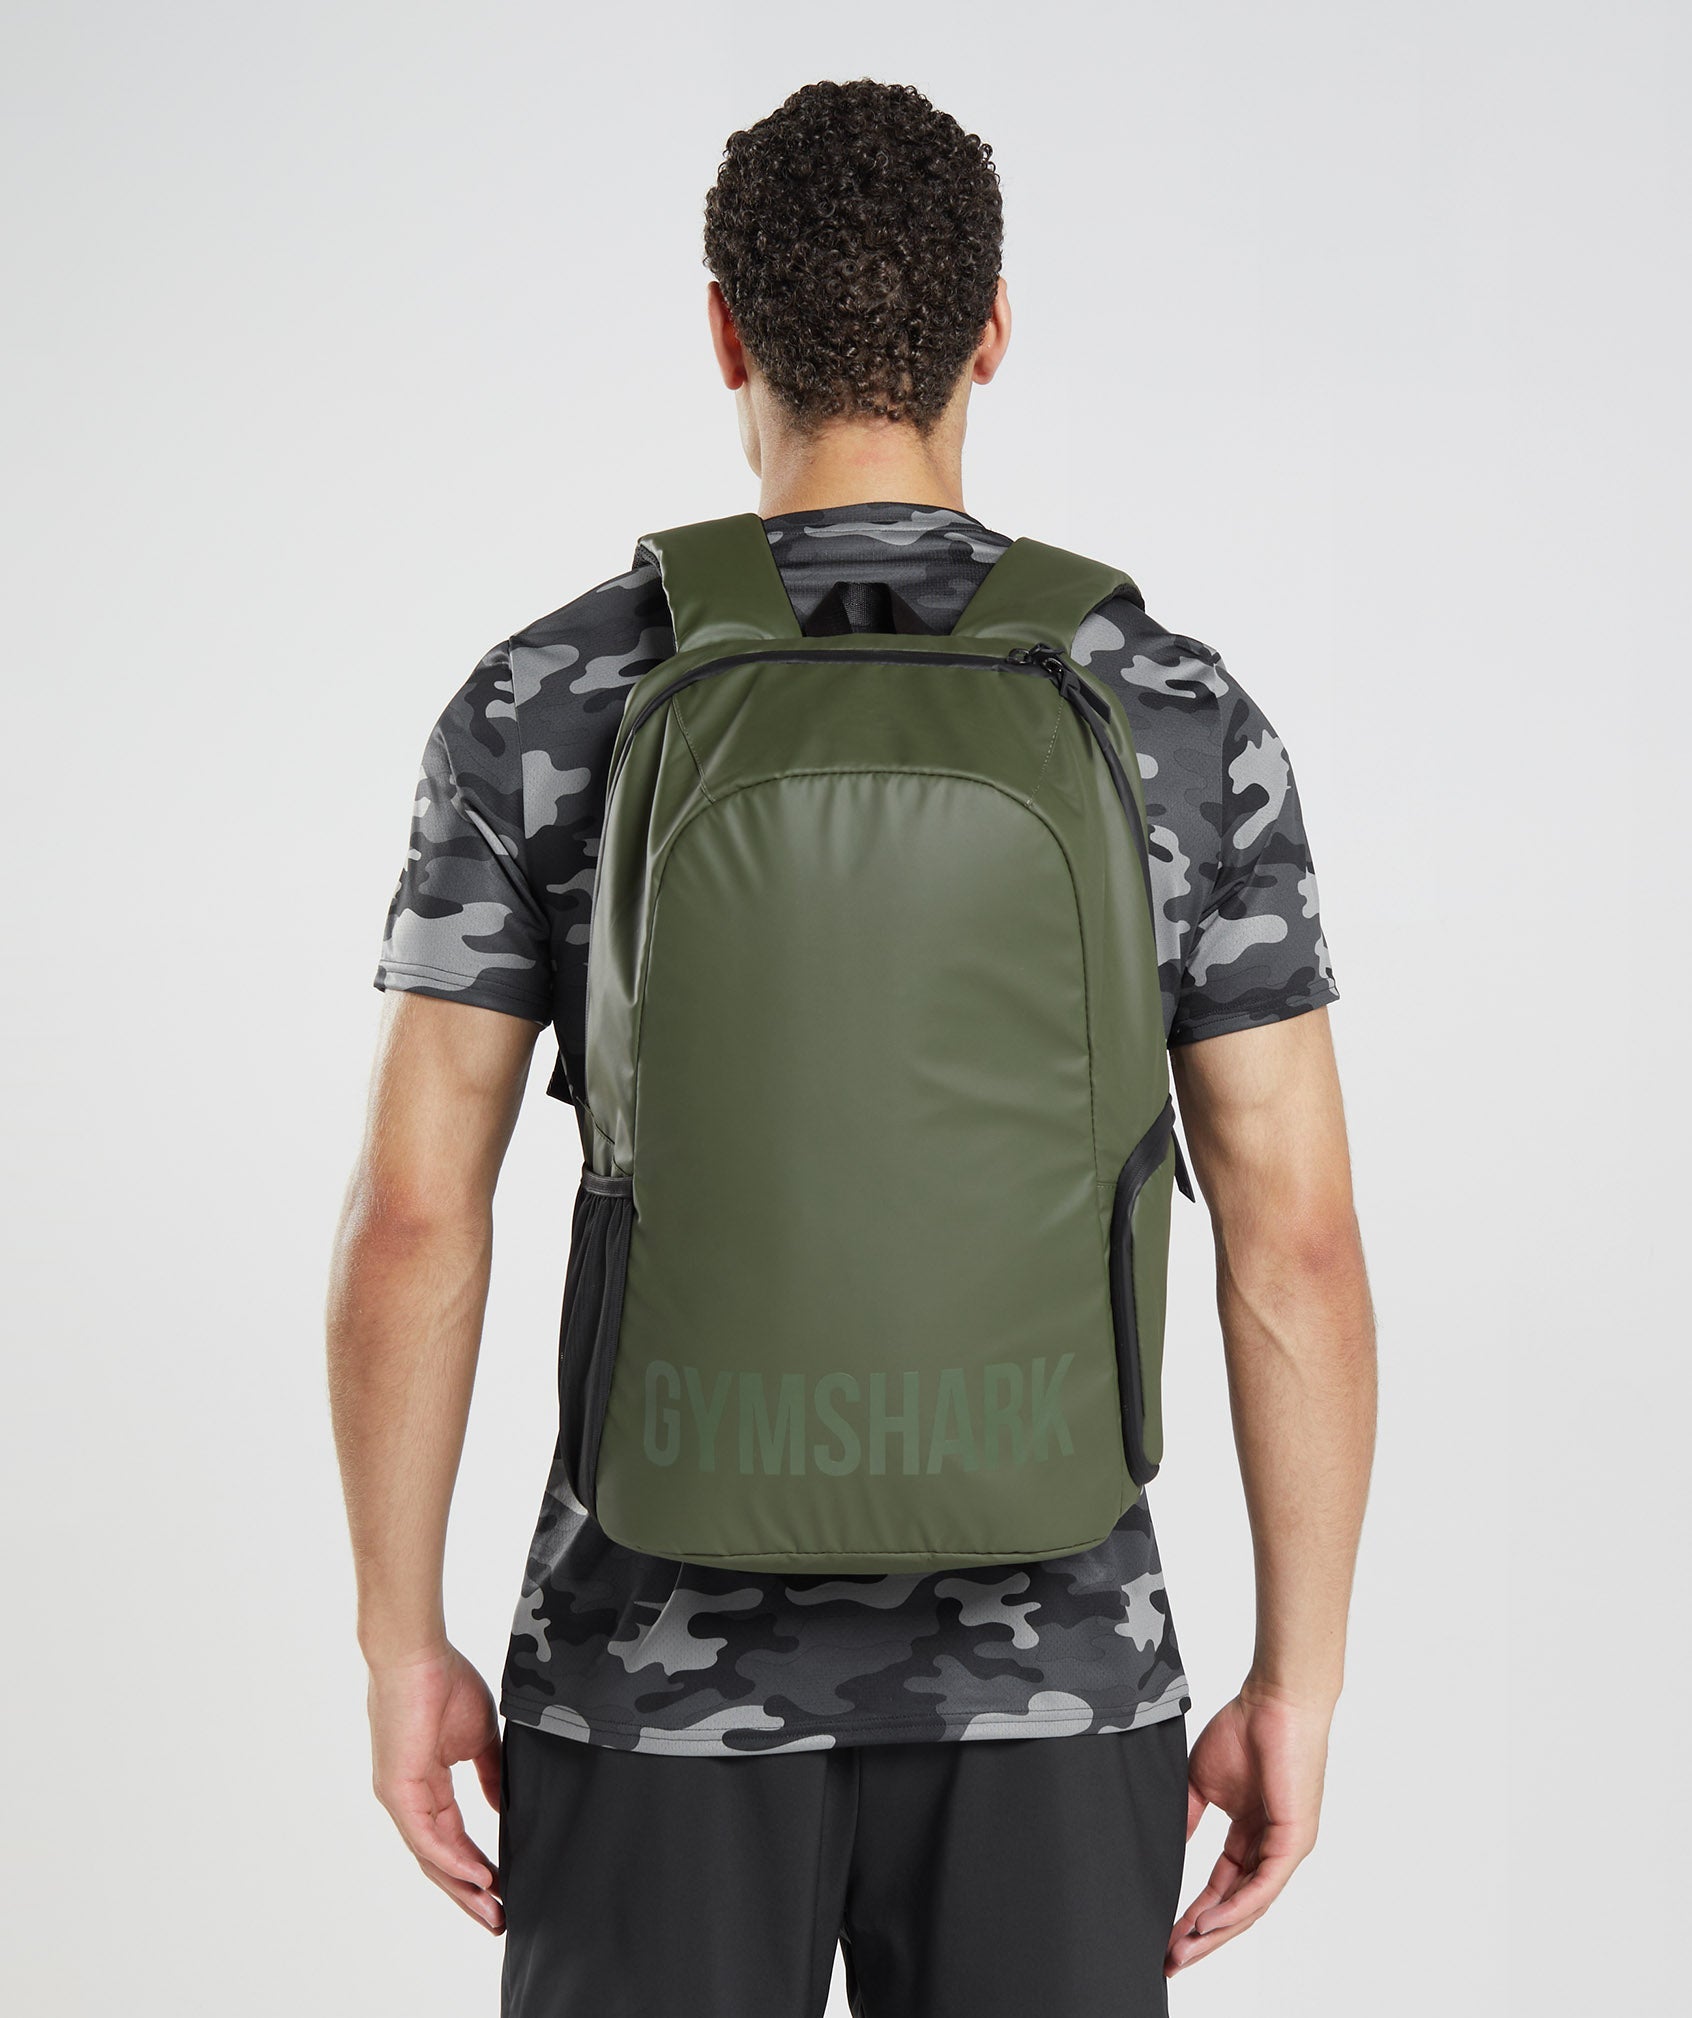 X-Series 0.1 Backpack in Core Olive/Black - view 5